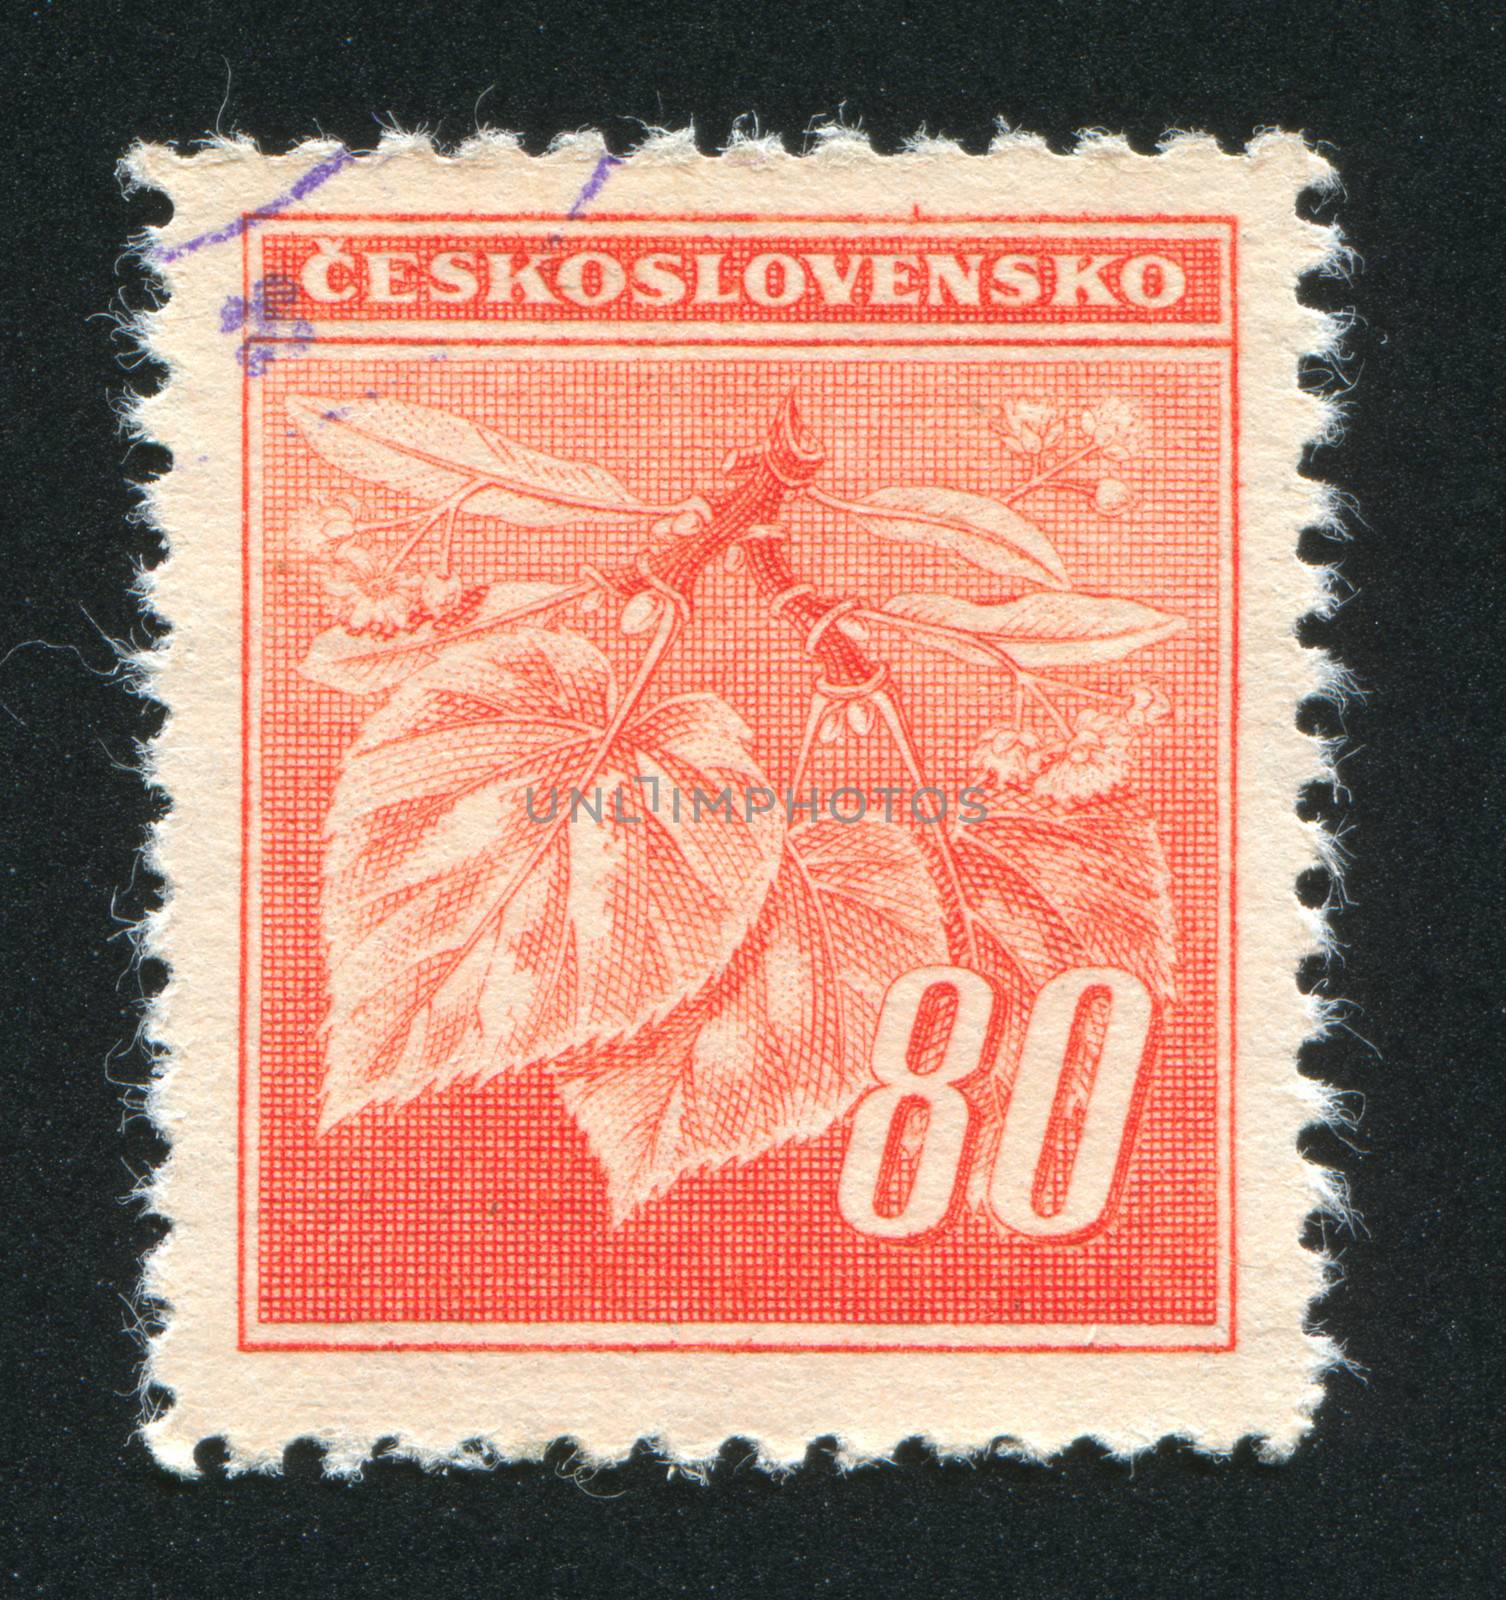 CZECHOSLOVAKIA - CIRCA 1939: stamp printed by Czechoslovakia, shows Linden Leaves and Buds, circa 1939